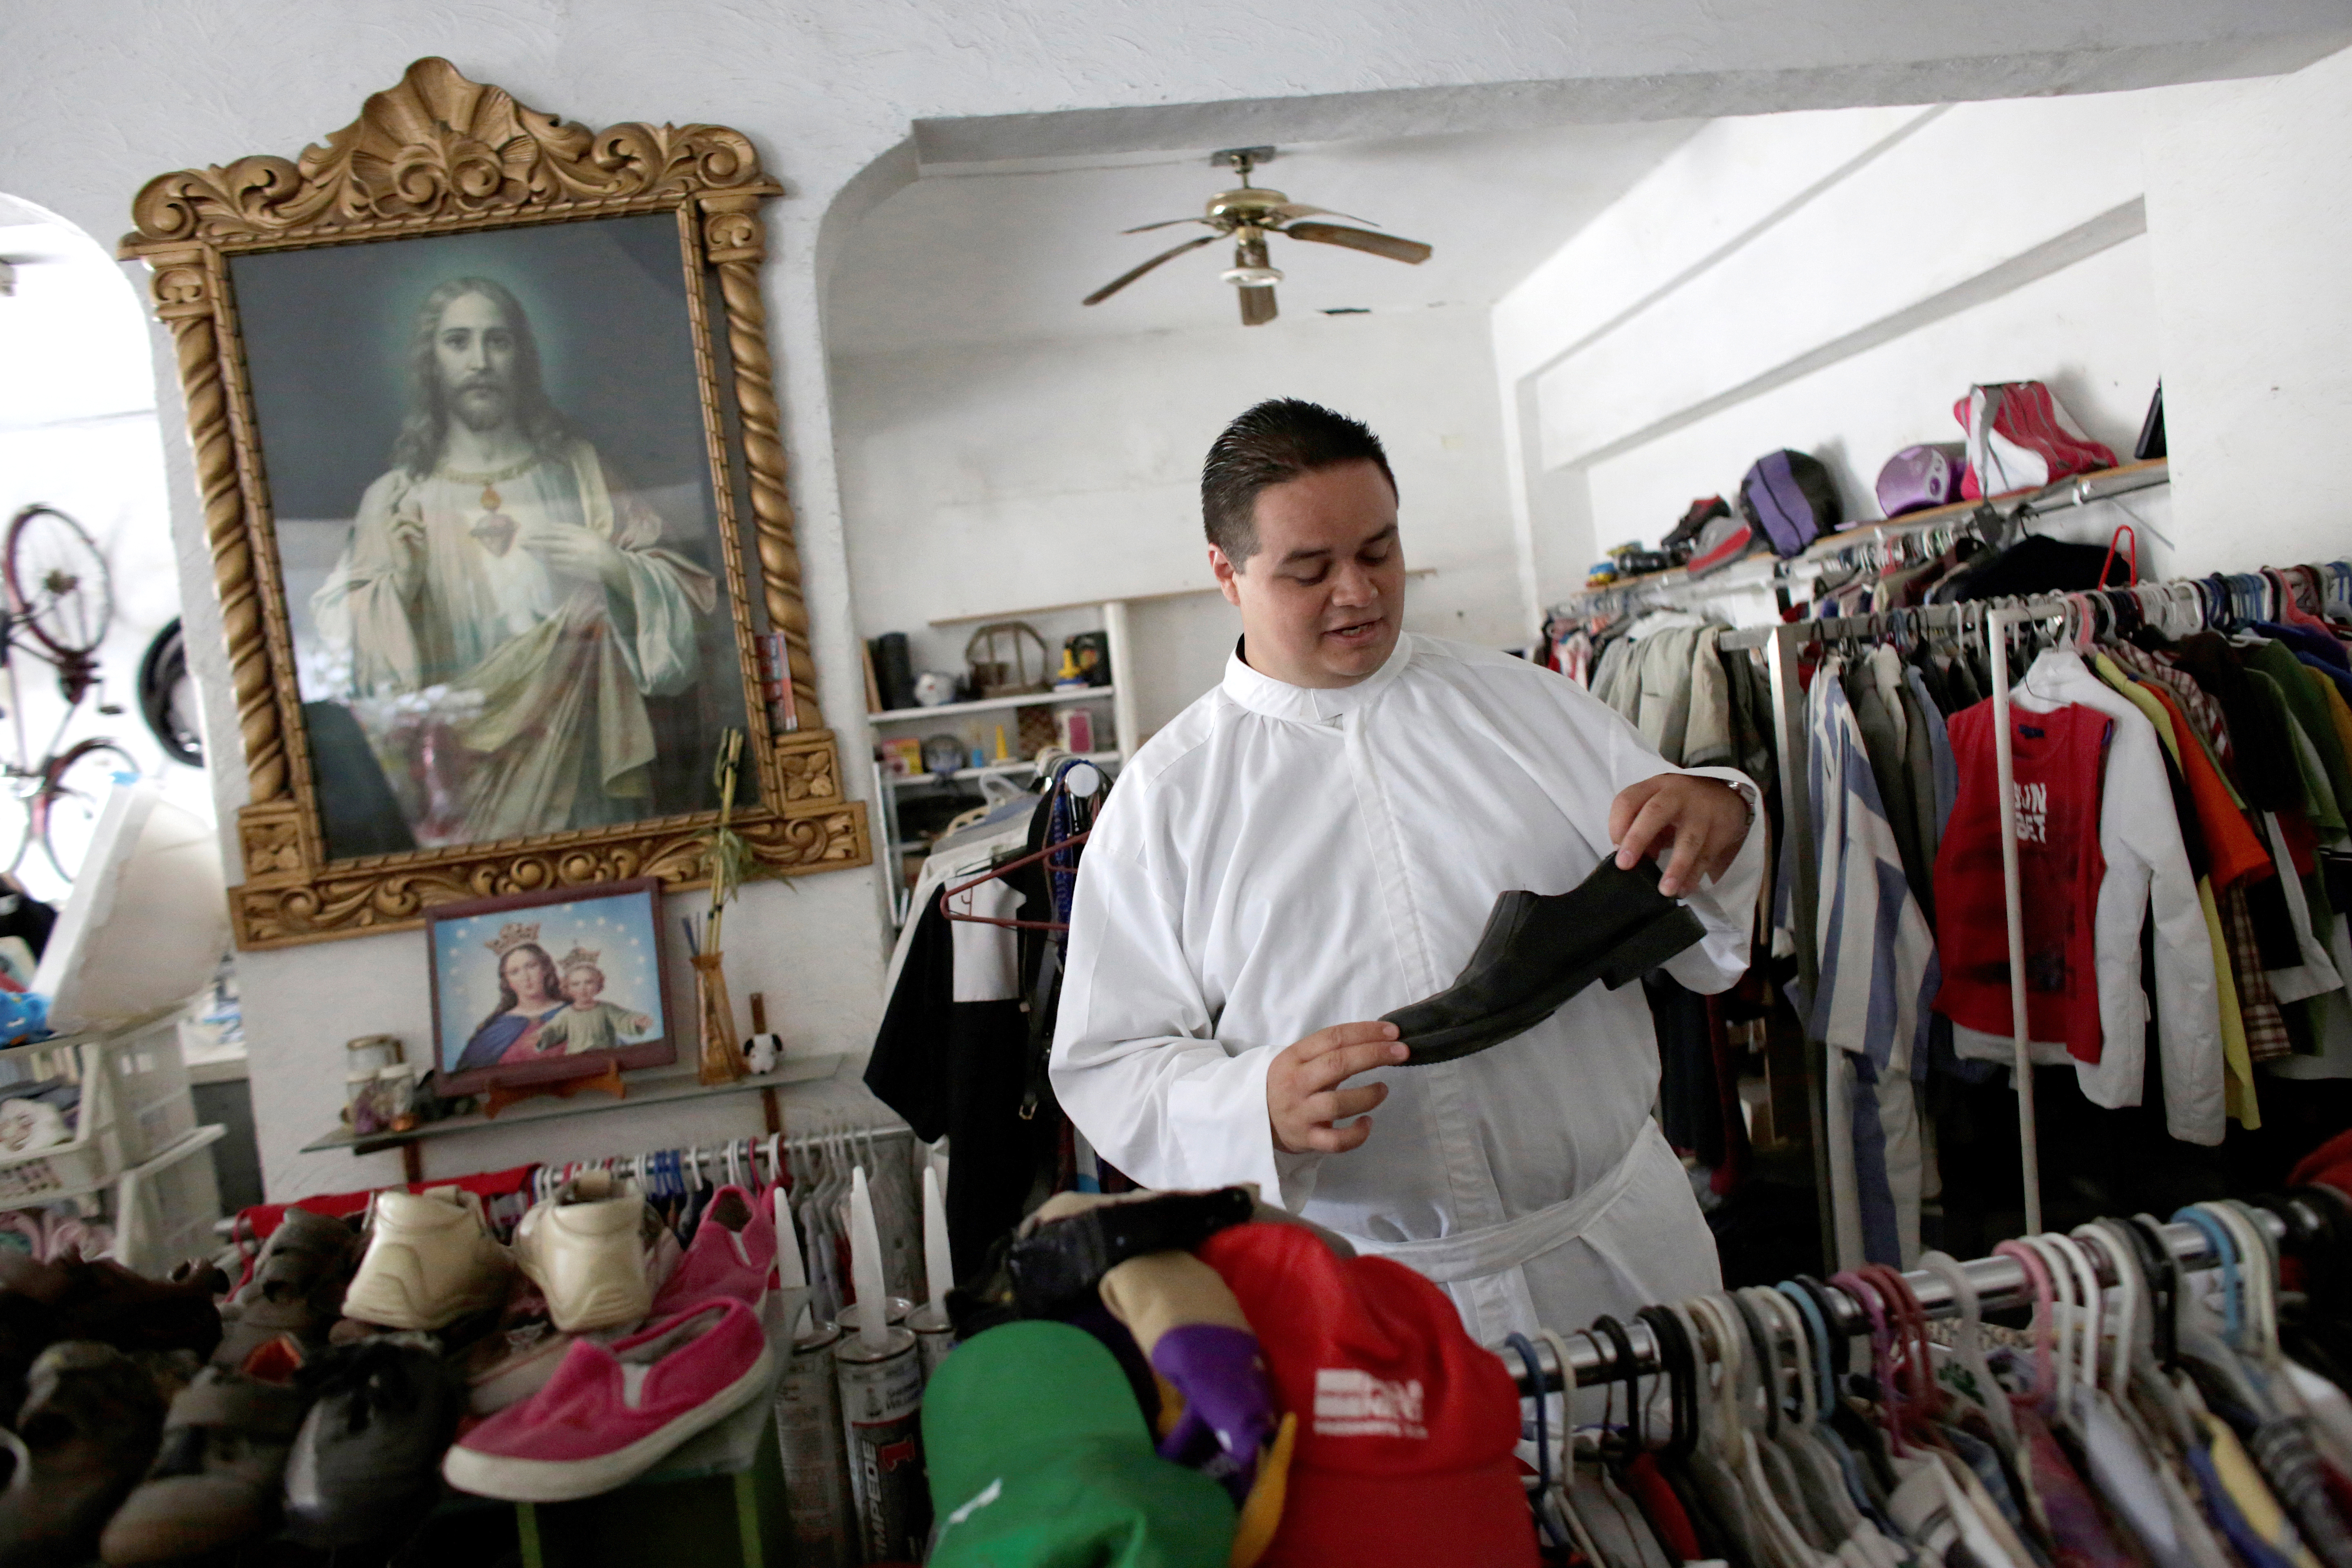 Fr. Jose Luis Guerra checks shoes at a second-hand shop July 27 on the outskirts of Monterrey, Mexico. Fr. Guerra works with gang members with his own group, dubbed the Gang of Christ. (CNS photo/Daniel Becerril, Reuters)